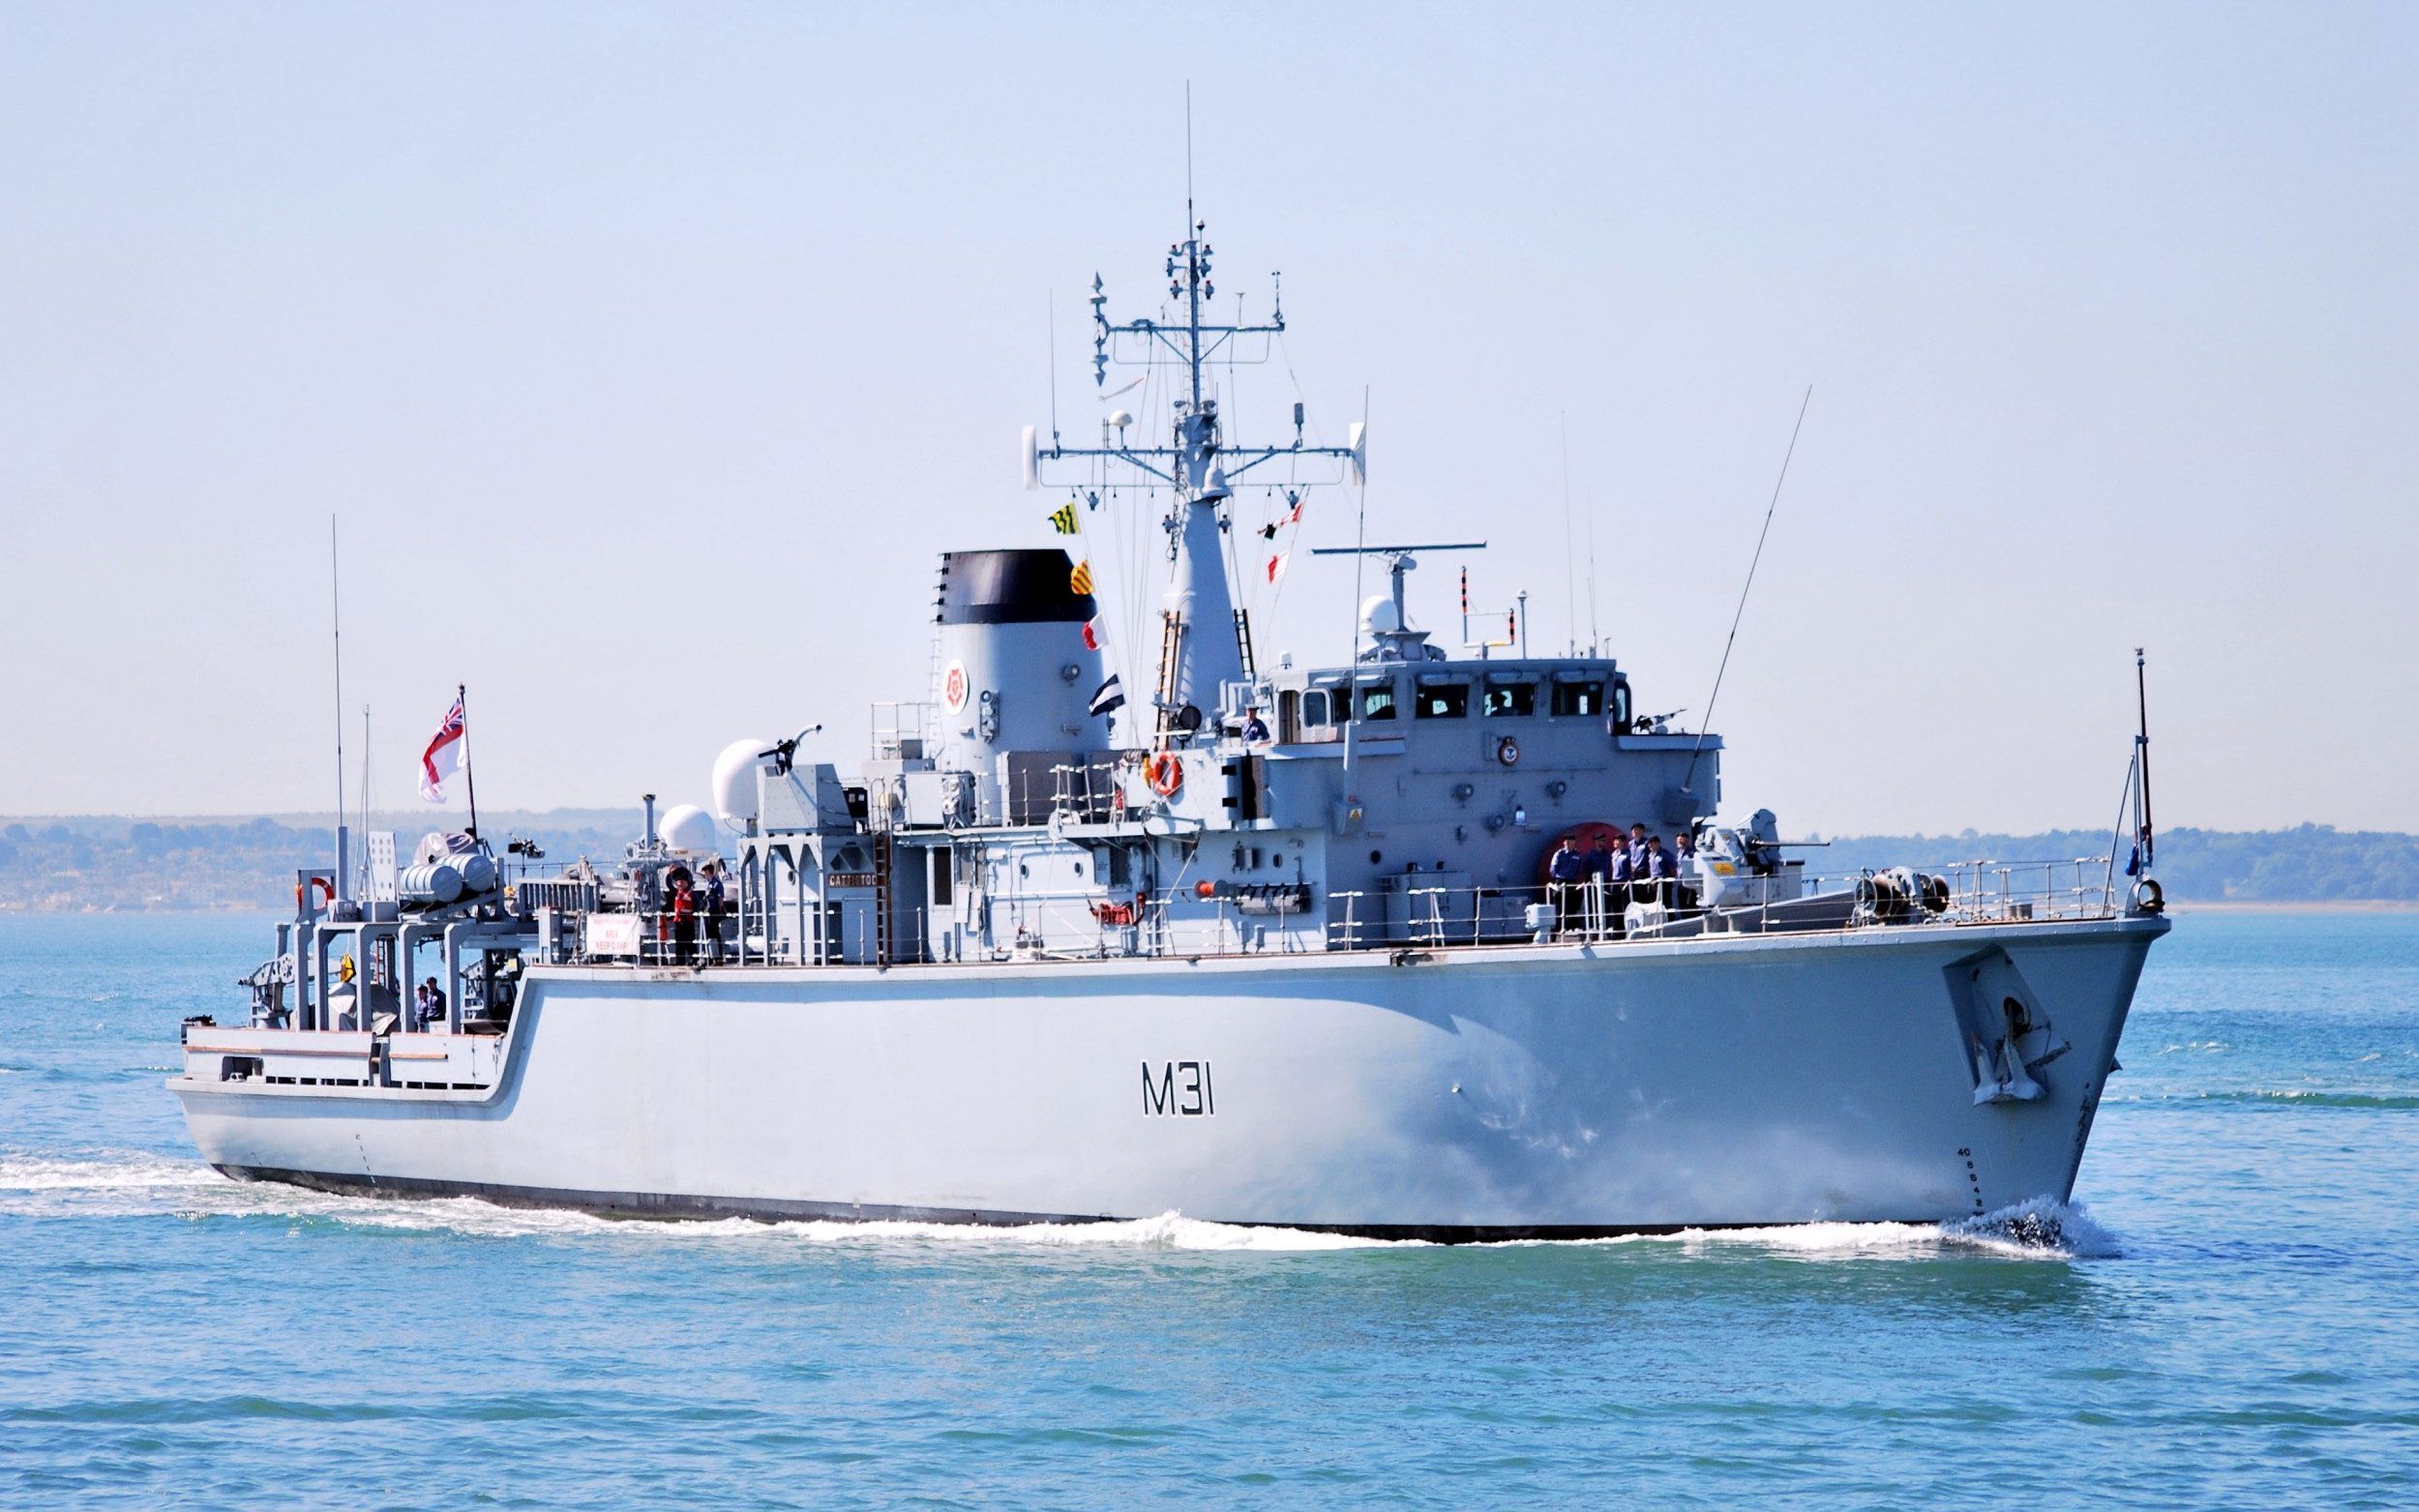 British minehunting ships to bolster Ukrainian Navy as UK and Norway launch maritime support initiative